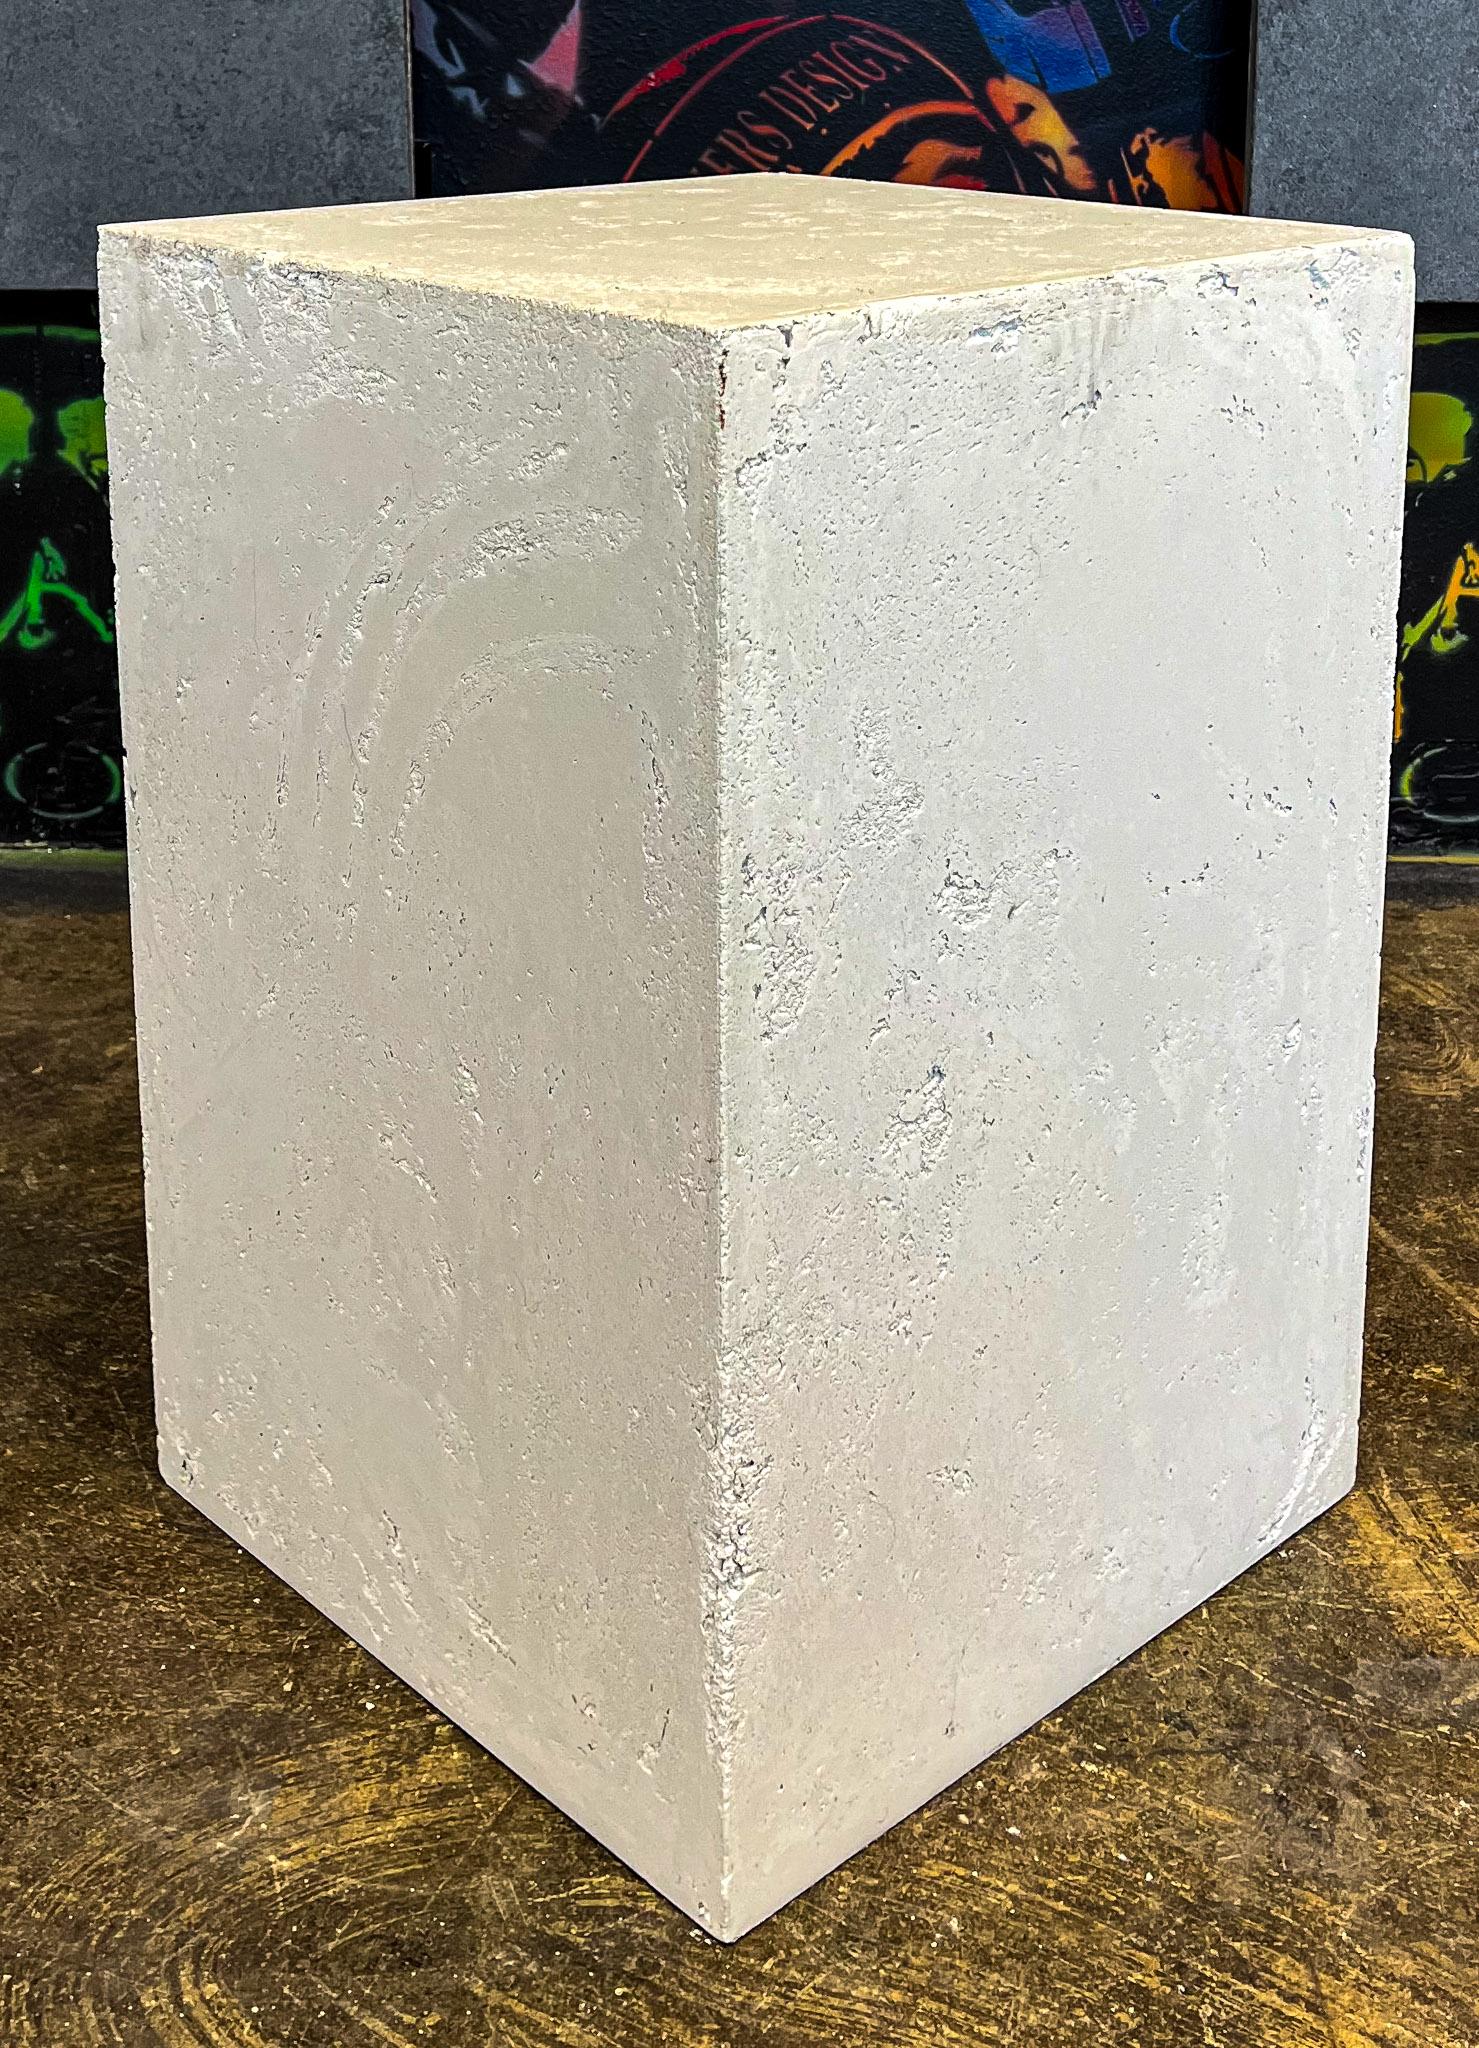 Elevate your decor with our Line RAW CONCRETE, a one-of-a-kind masterpiece that will elevate any space. Though uniform in size and color, the unique texture and stunning imperfections, such as strike marks and other details, make each cylinder truly